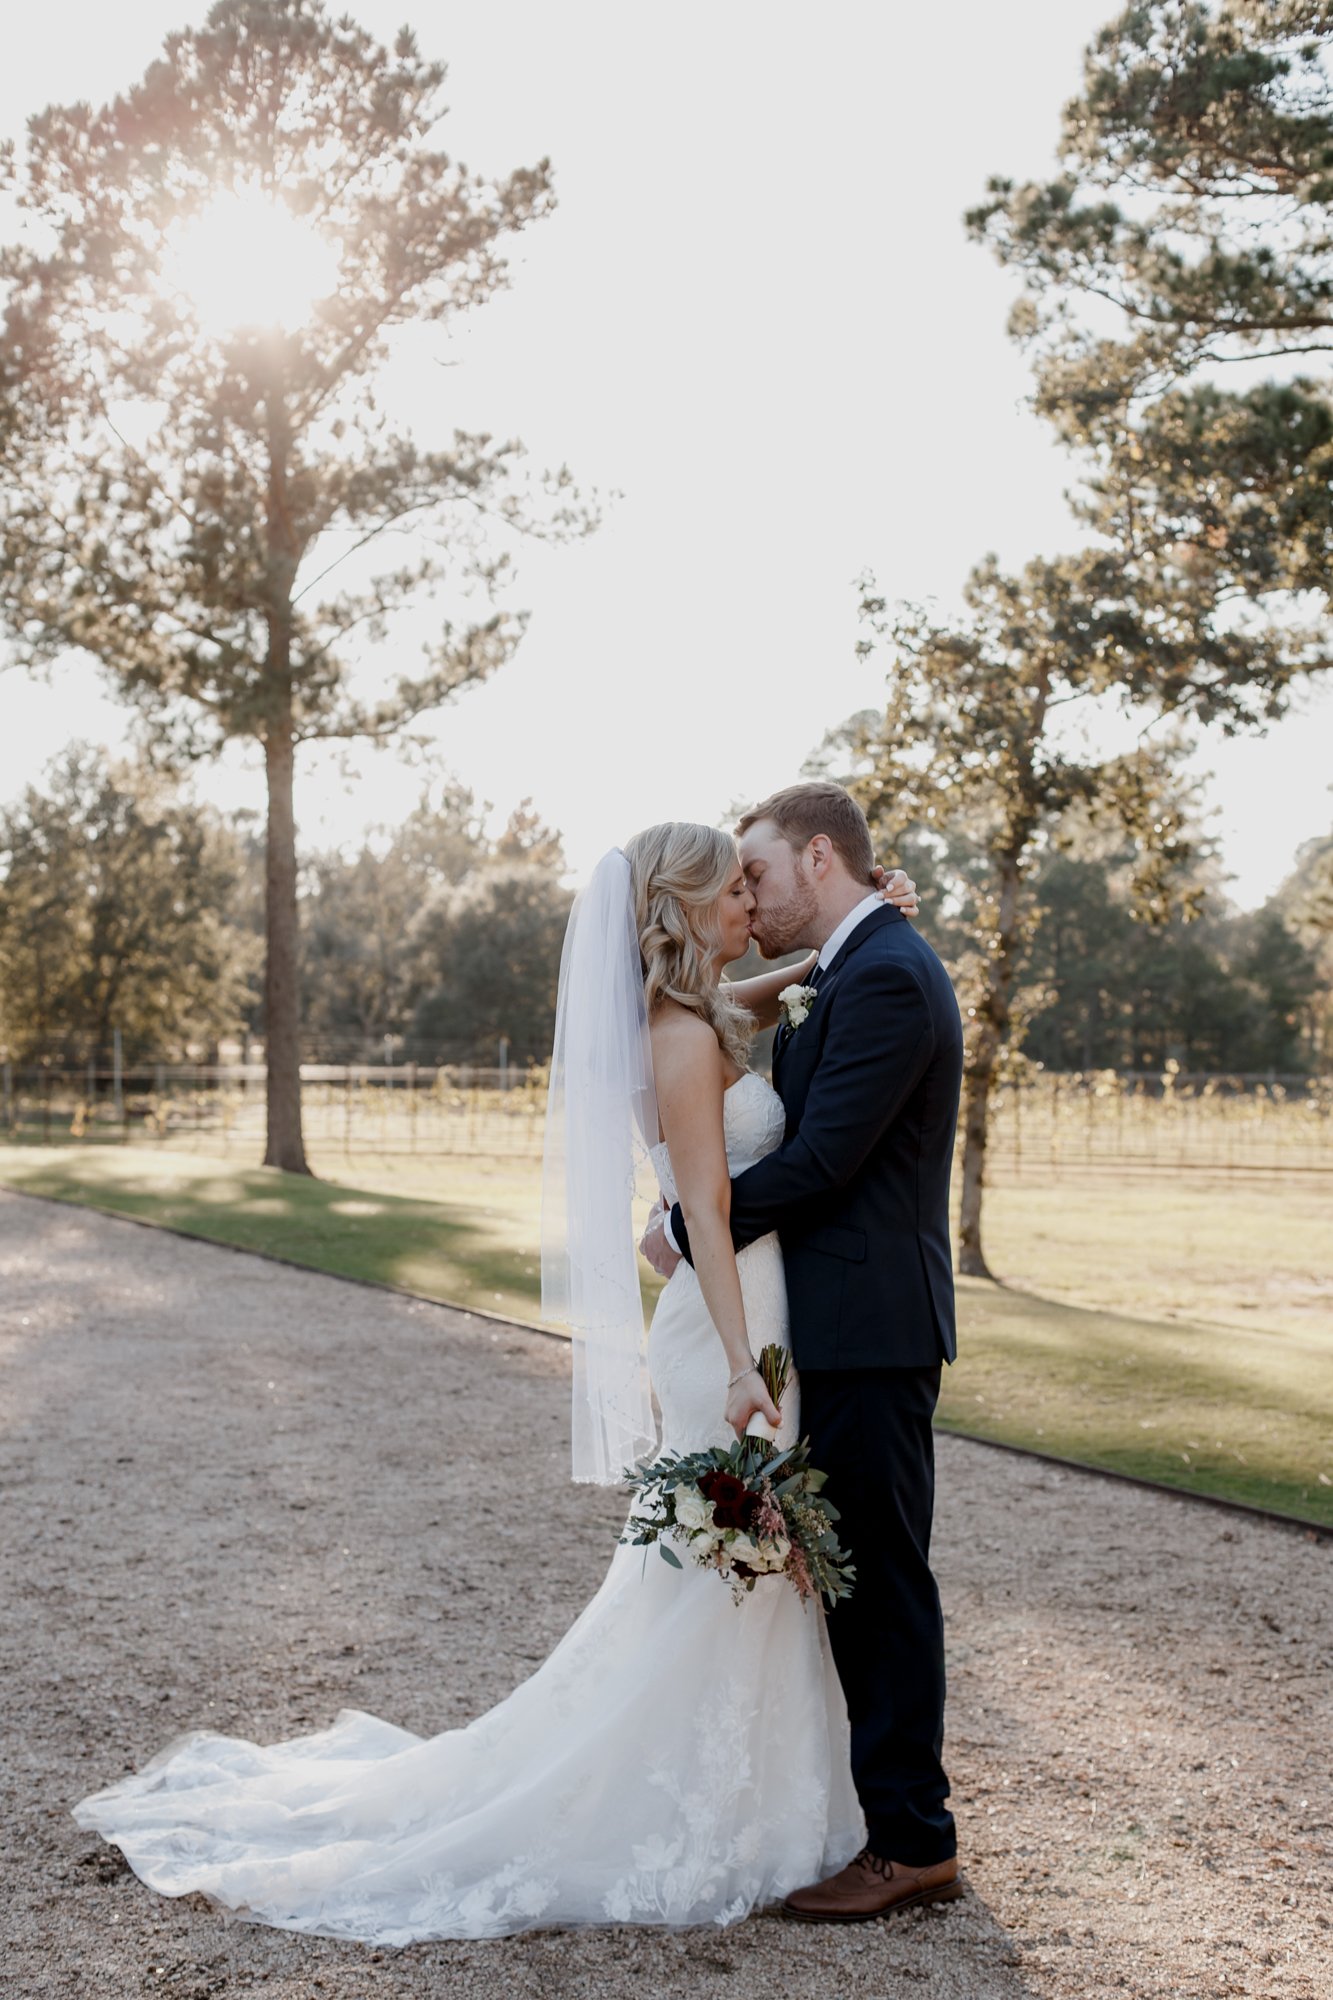 Bride and groom kiss in sunlight - golden hour sunset portraits. Wedding at The Vine (New Ulm, TX)